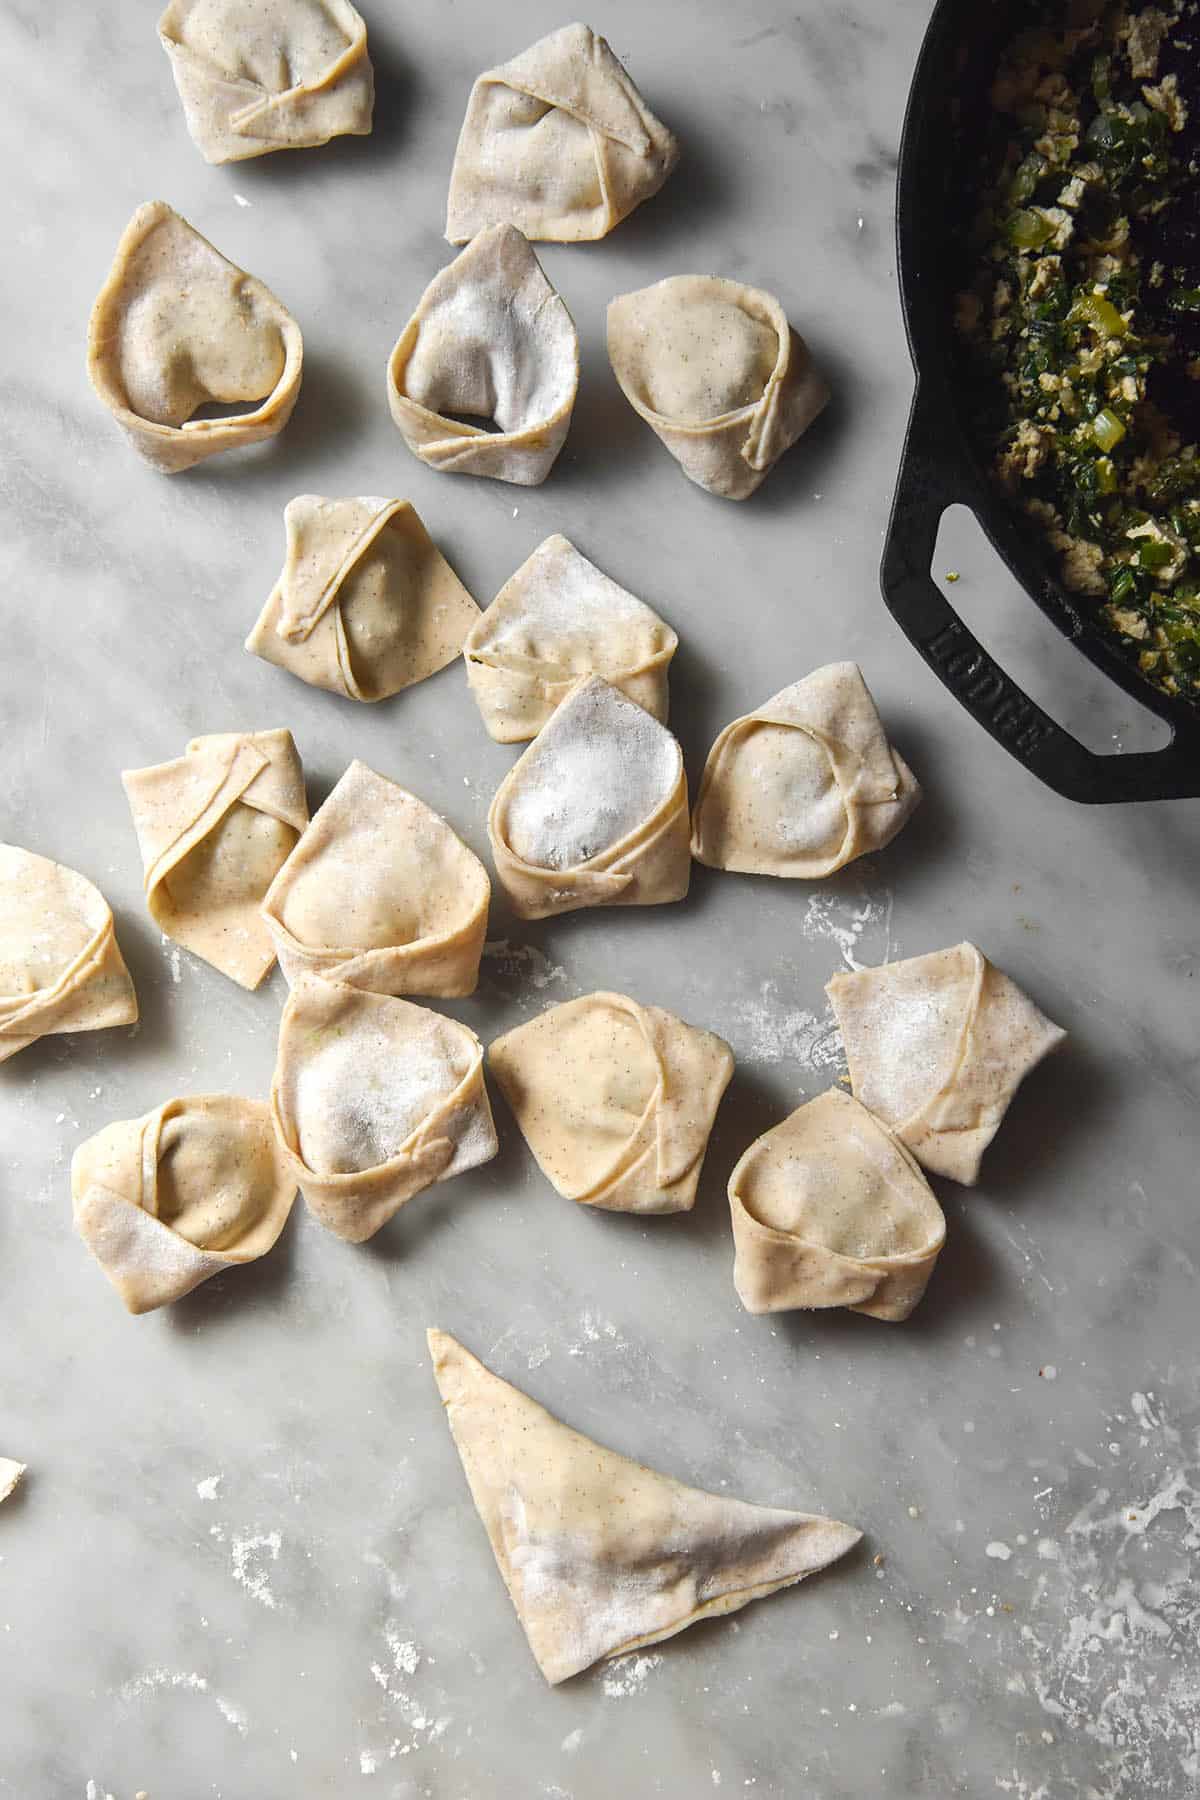 An instructional image demonstrating how to fold gluten free wonton wrappers, set on a white marble table